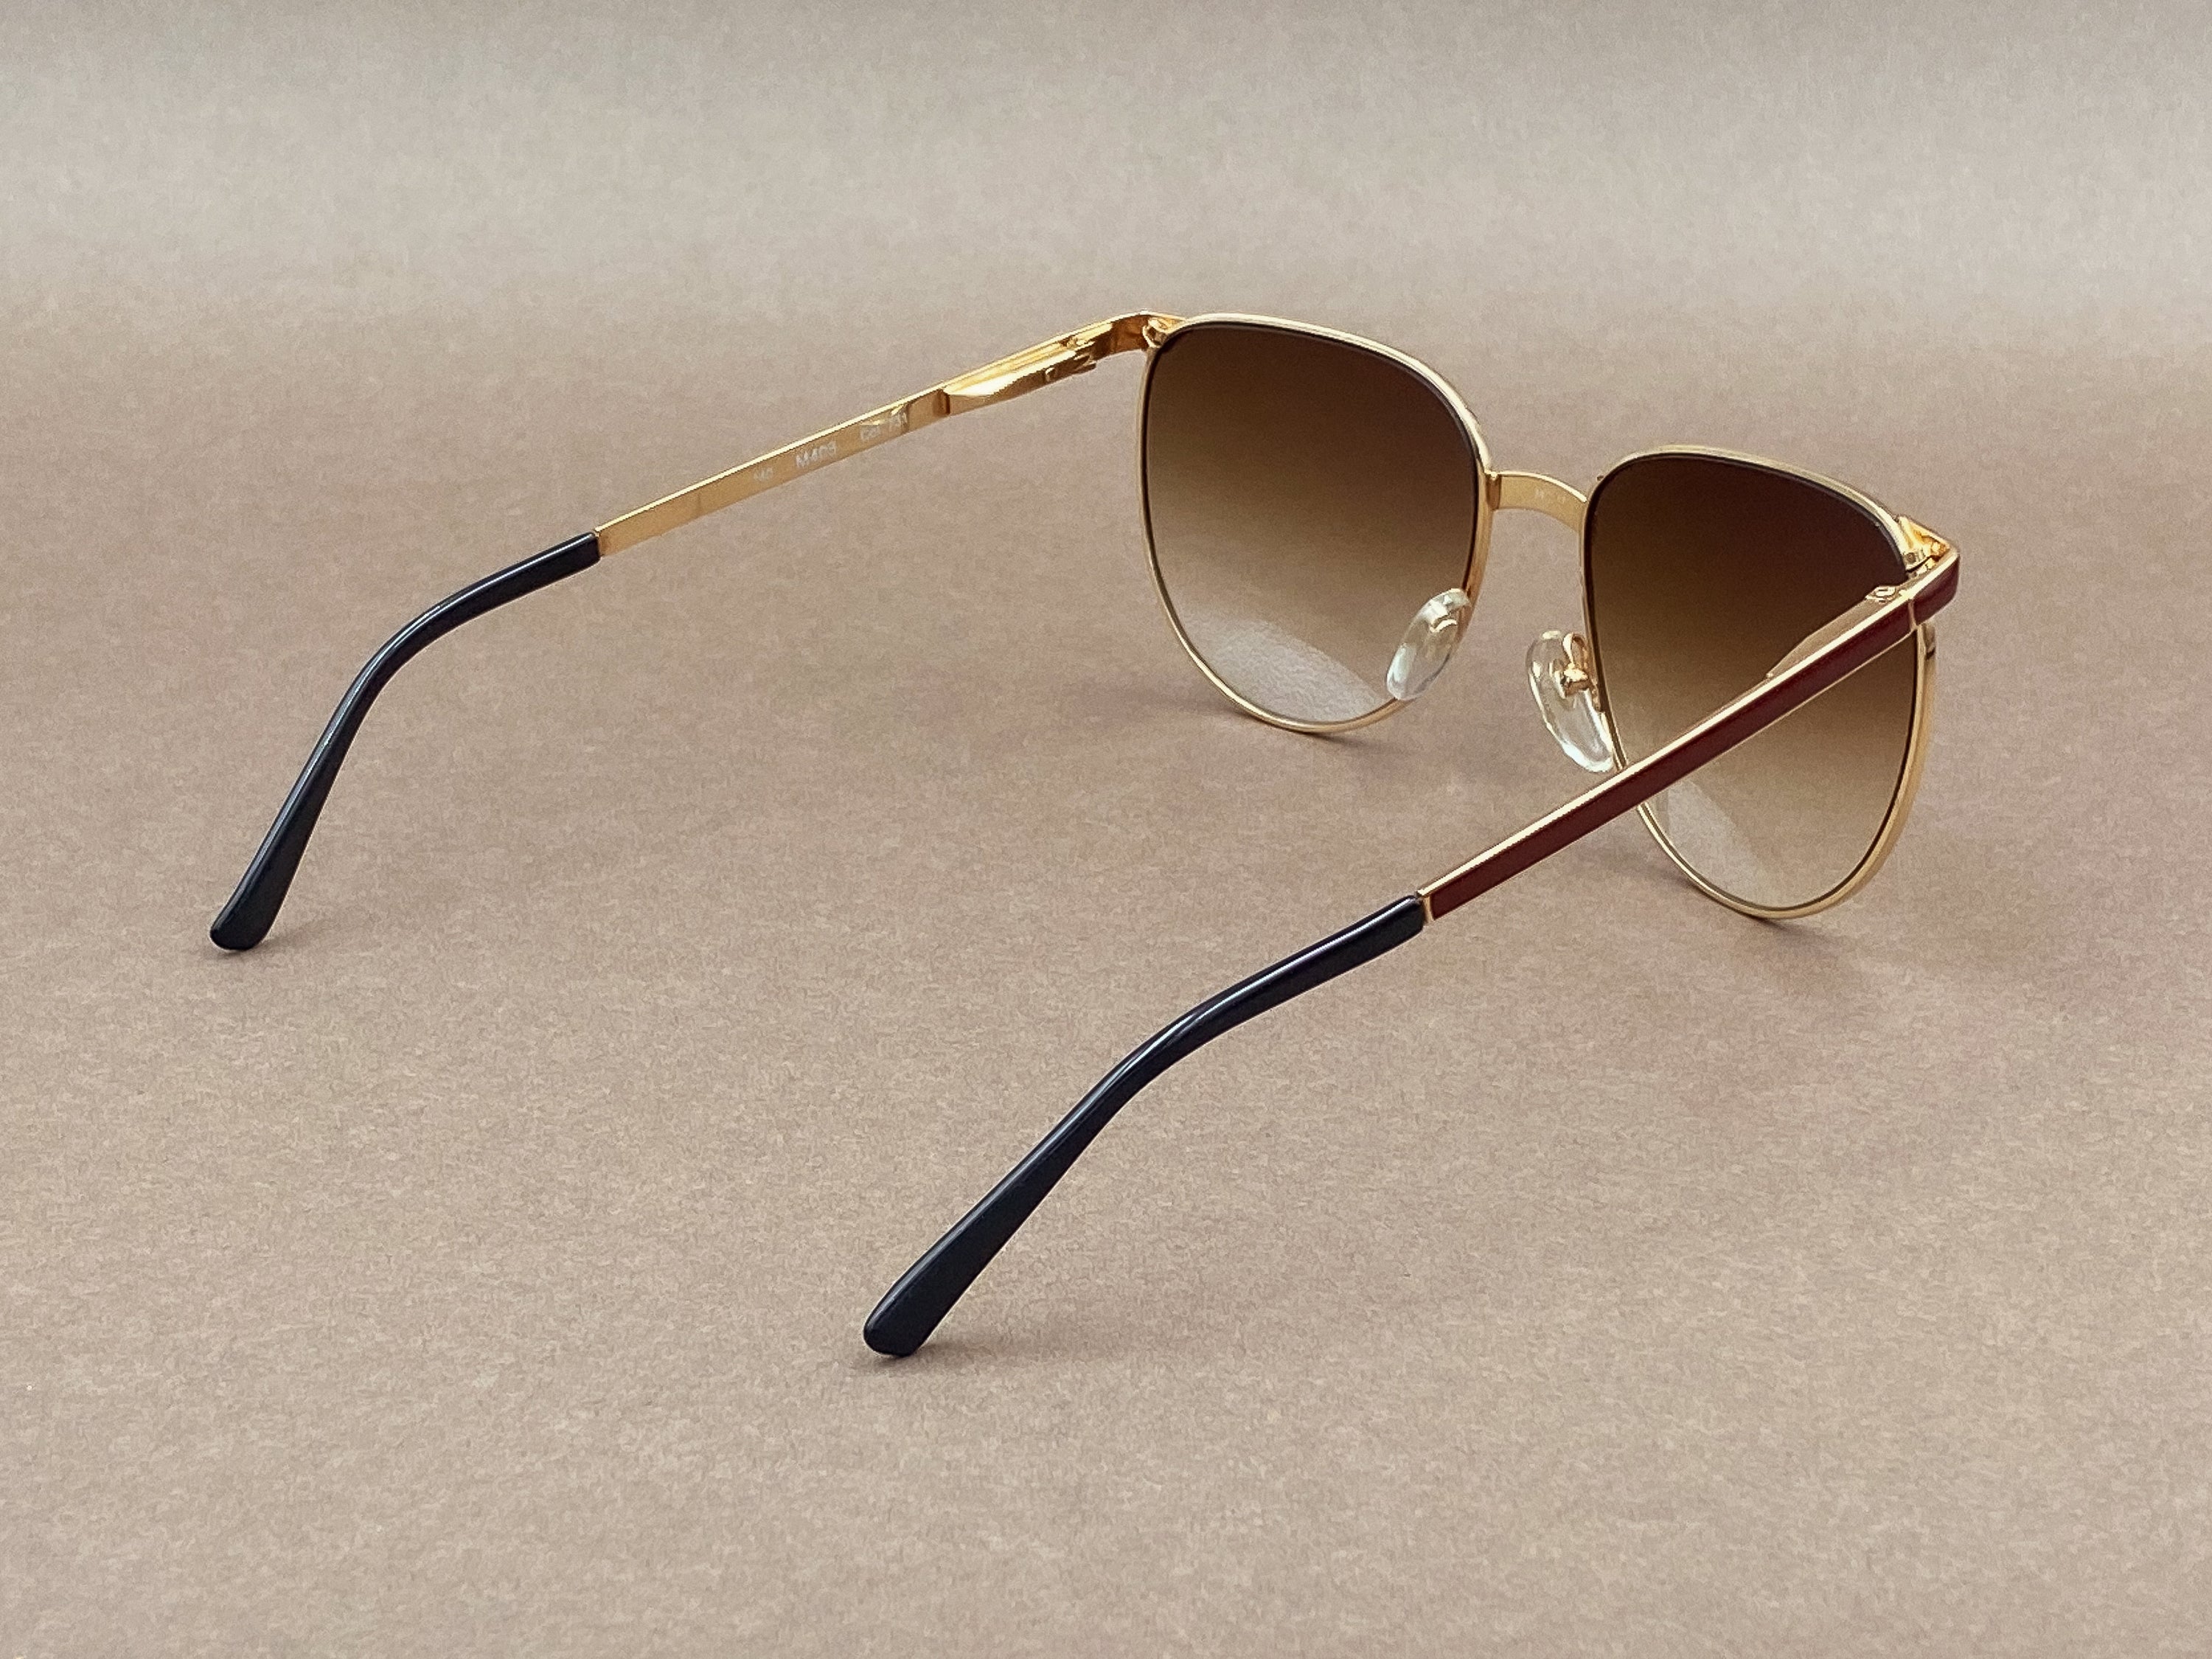 Dunhill 6099 gold filled sunglasses